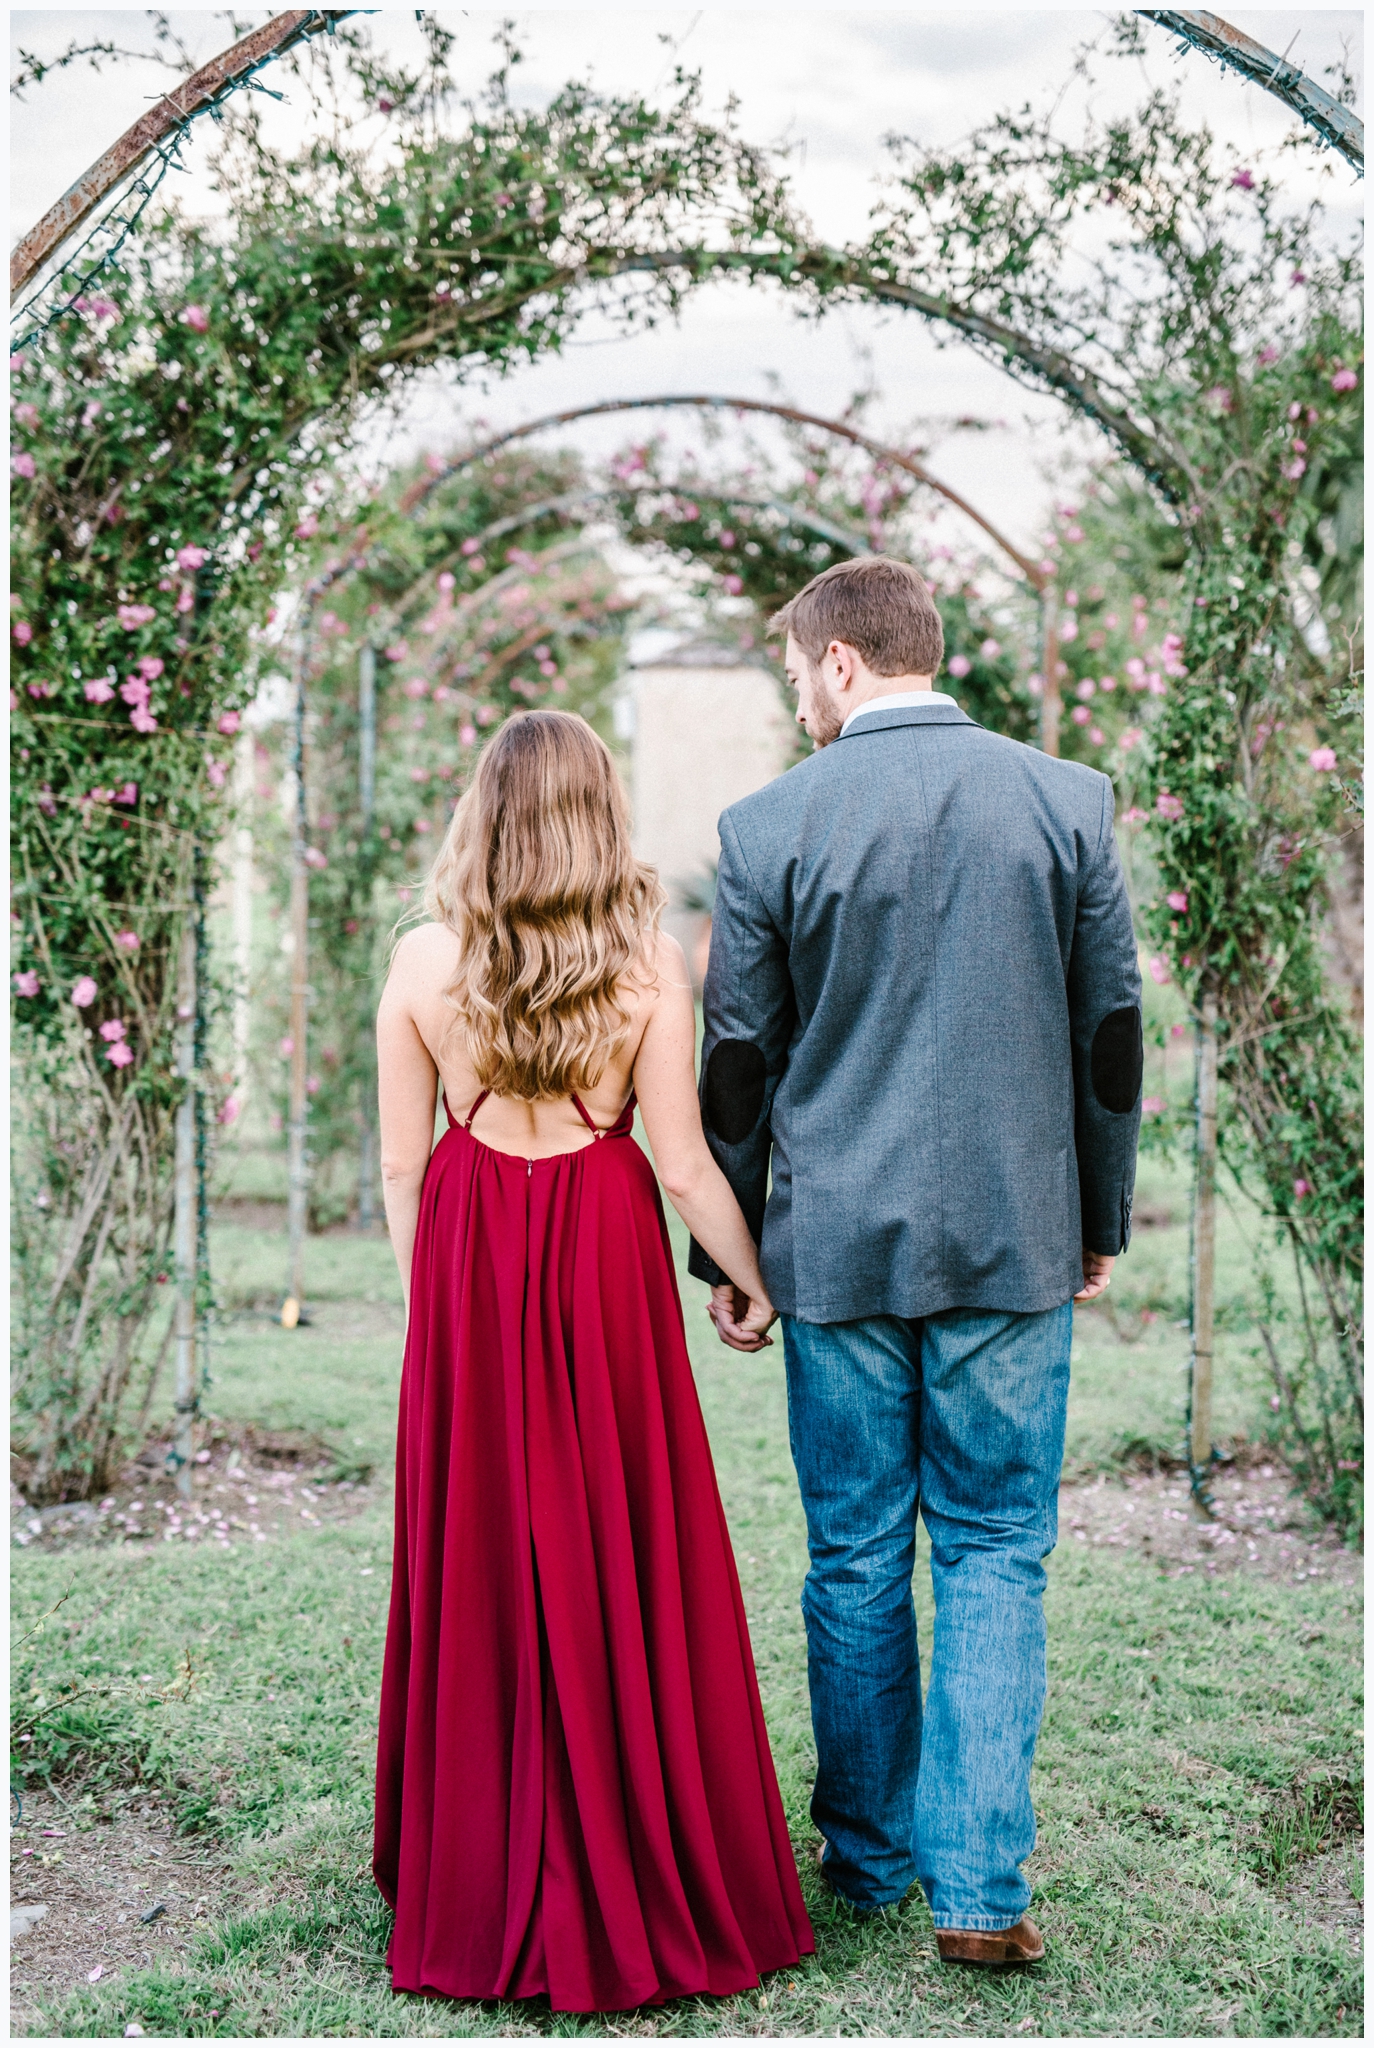 joslyn-holtfort-photography-engagement-session-le-san-michele-buda-texas_0014